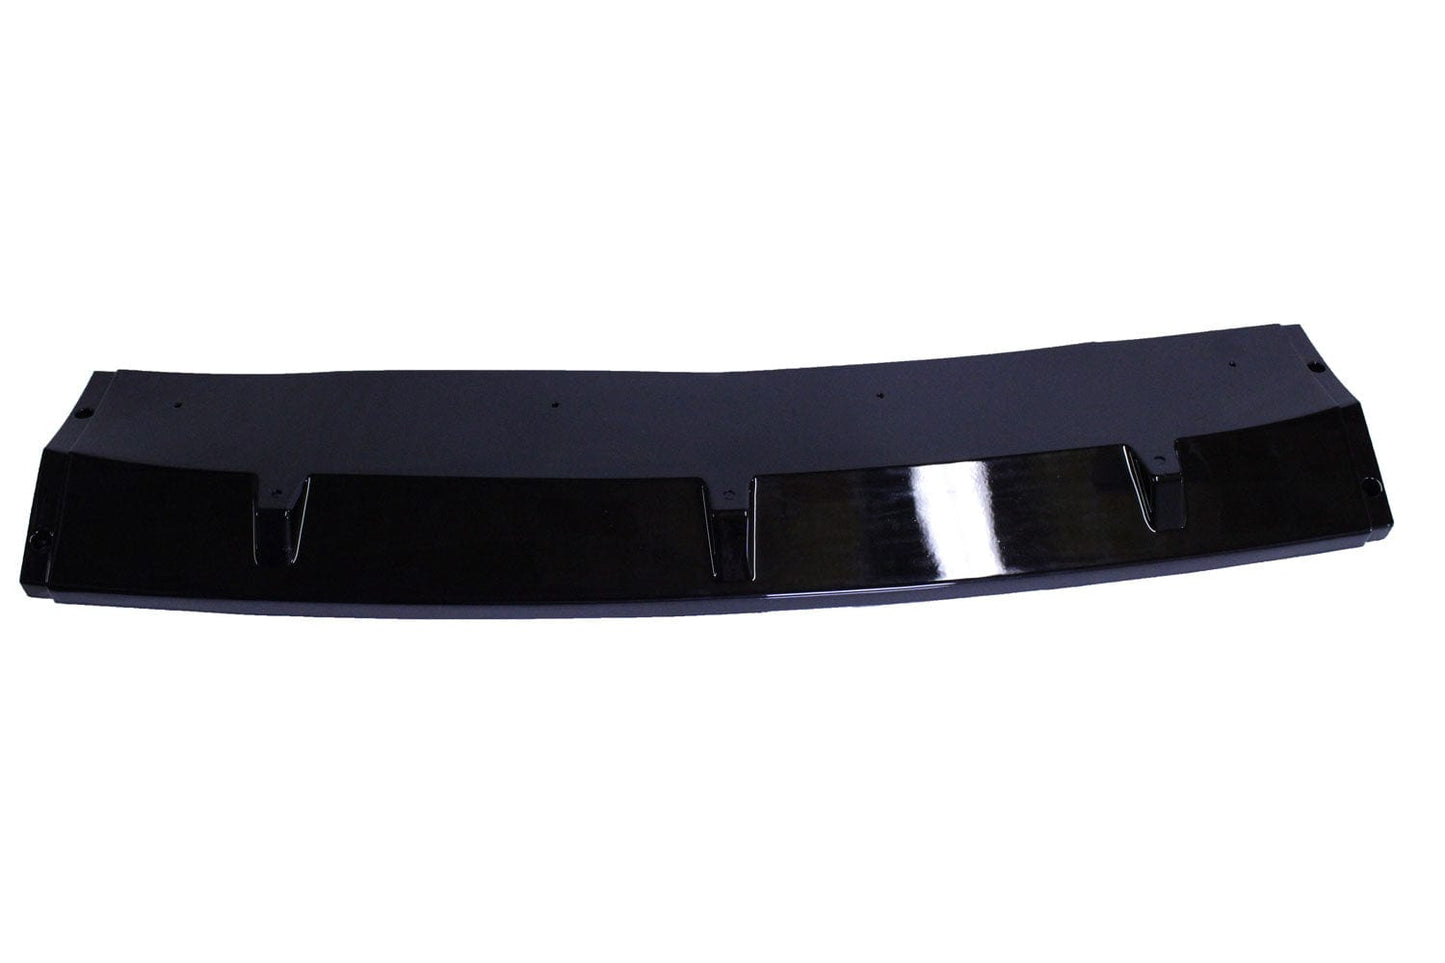 Front lip compatible with BMW X3 G01 and X4 G02 gloss black